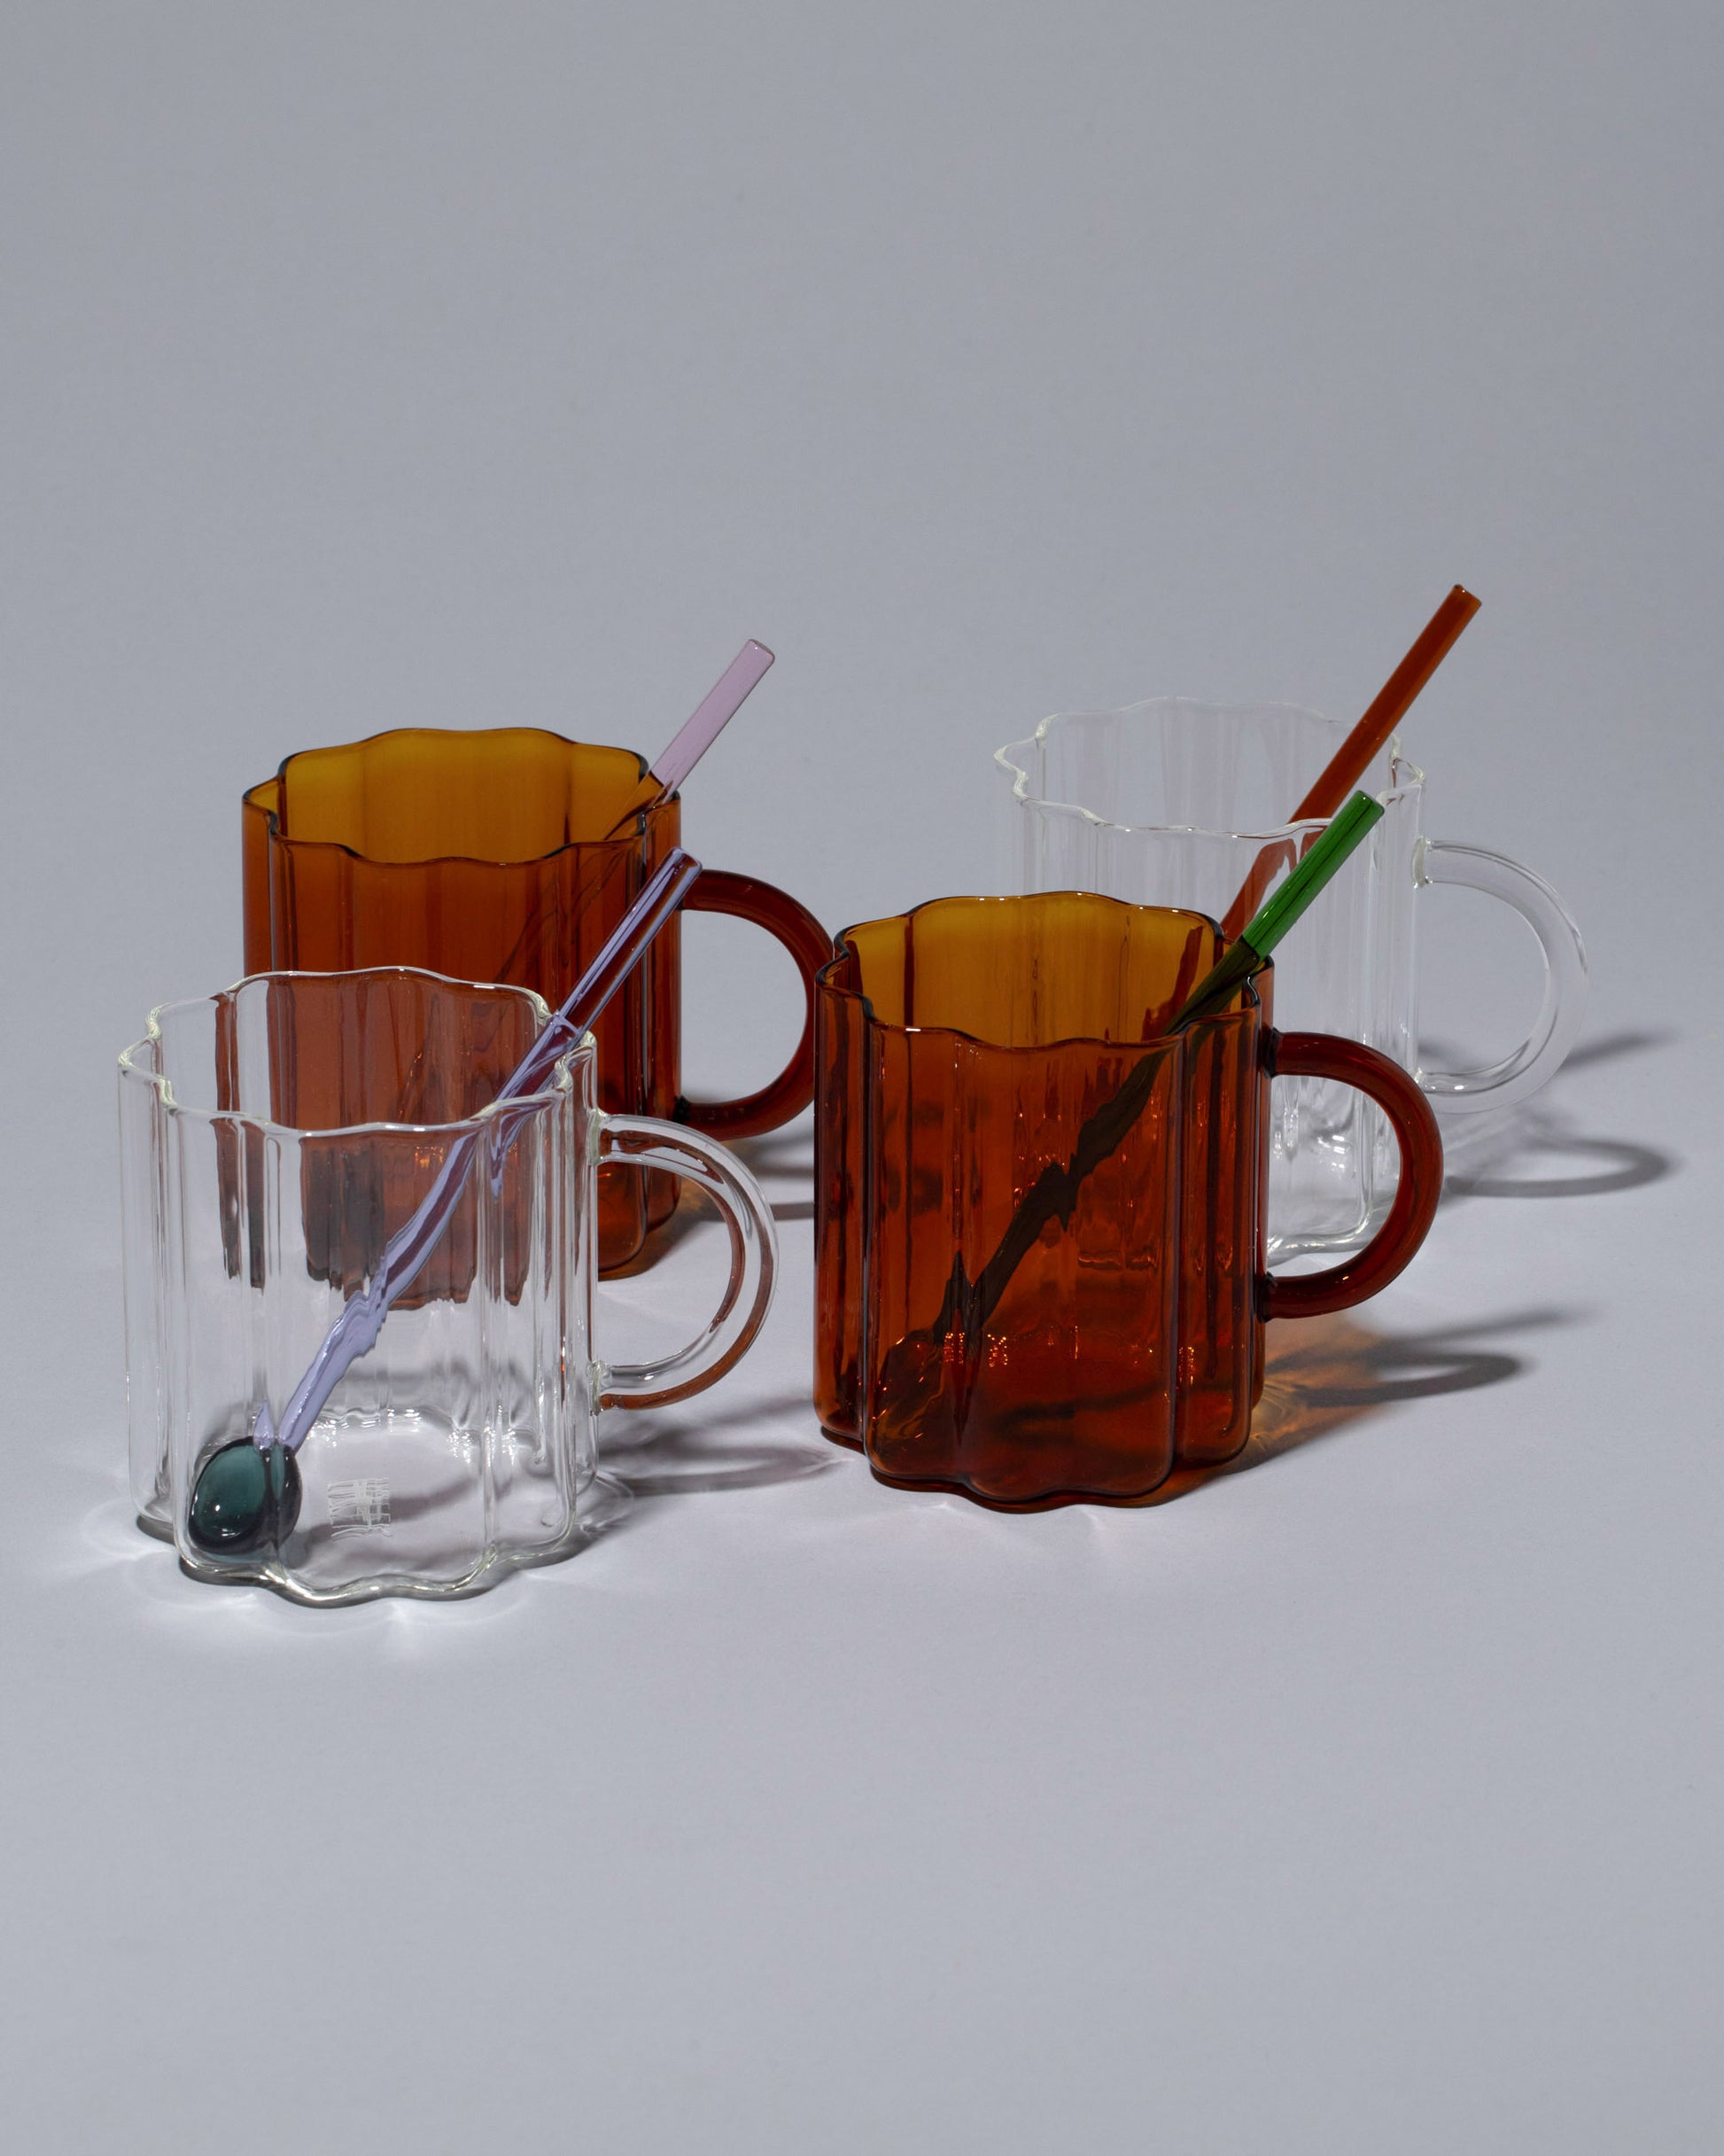 FAZEEK Coffee & Tea Set, including the Amber and Clear Wave Mugs, and the Teaspoons Set on light color background.